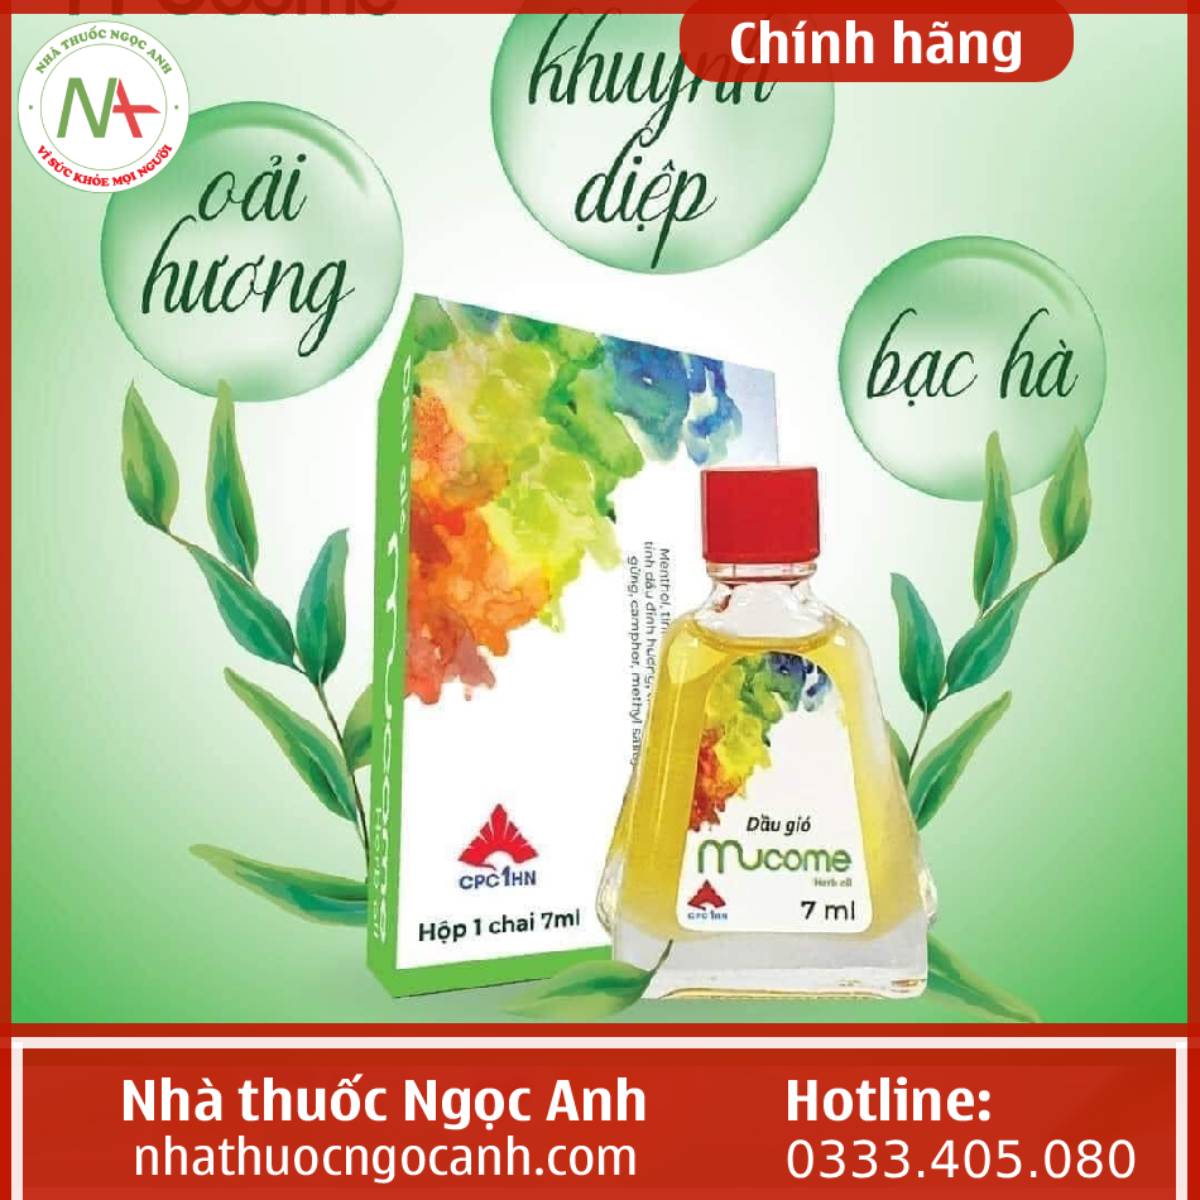 Mucome Herb Oil